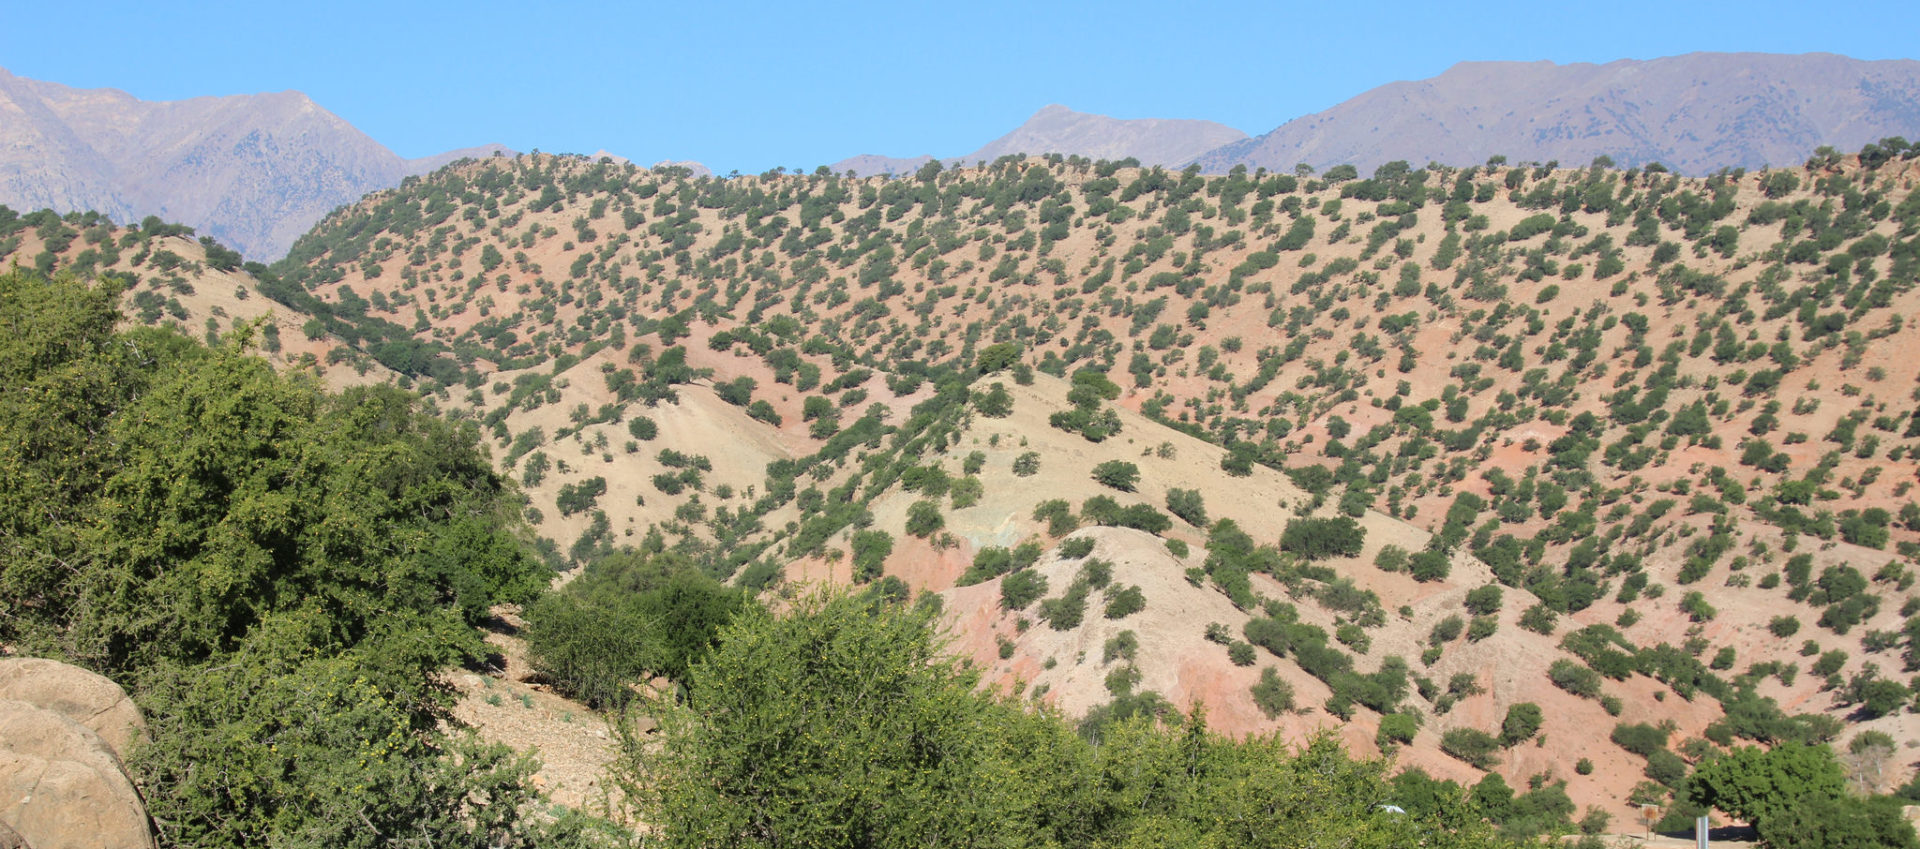 The argan forest. Photo: mauro gambini/flickr